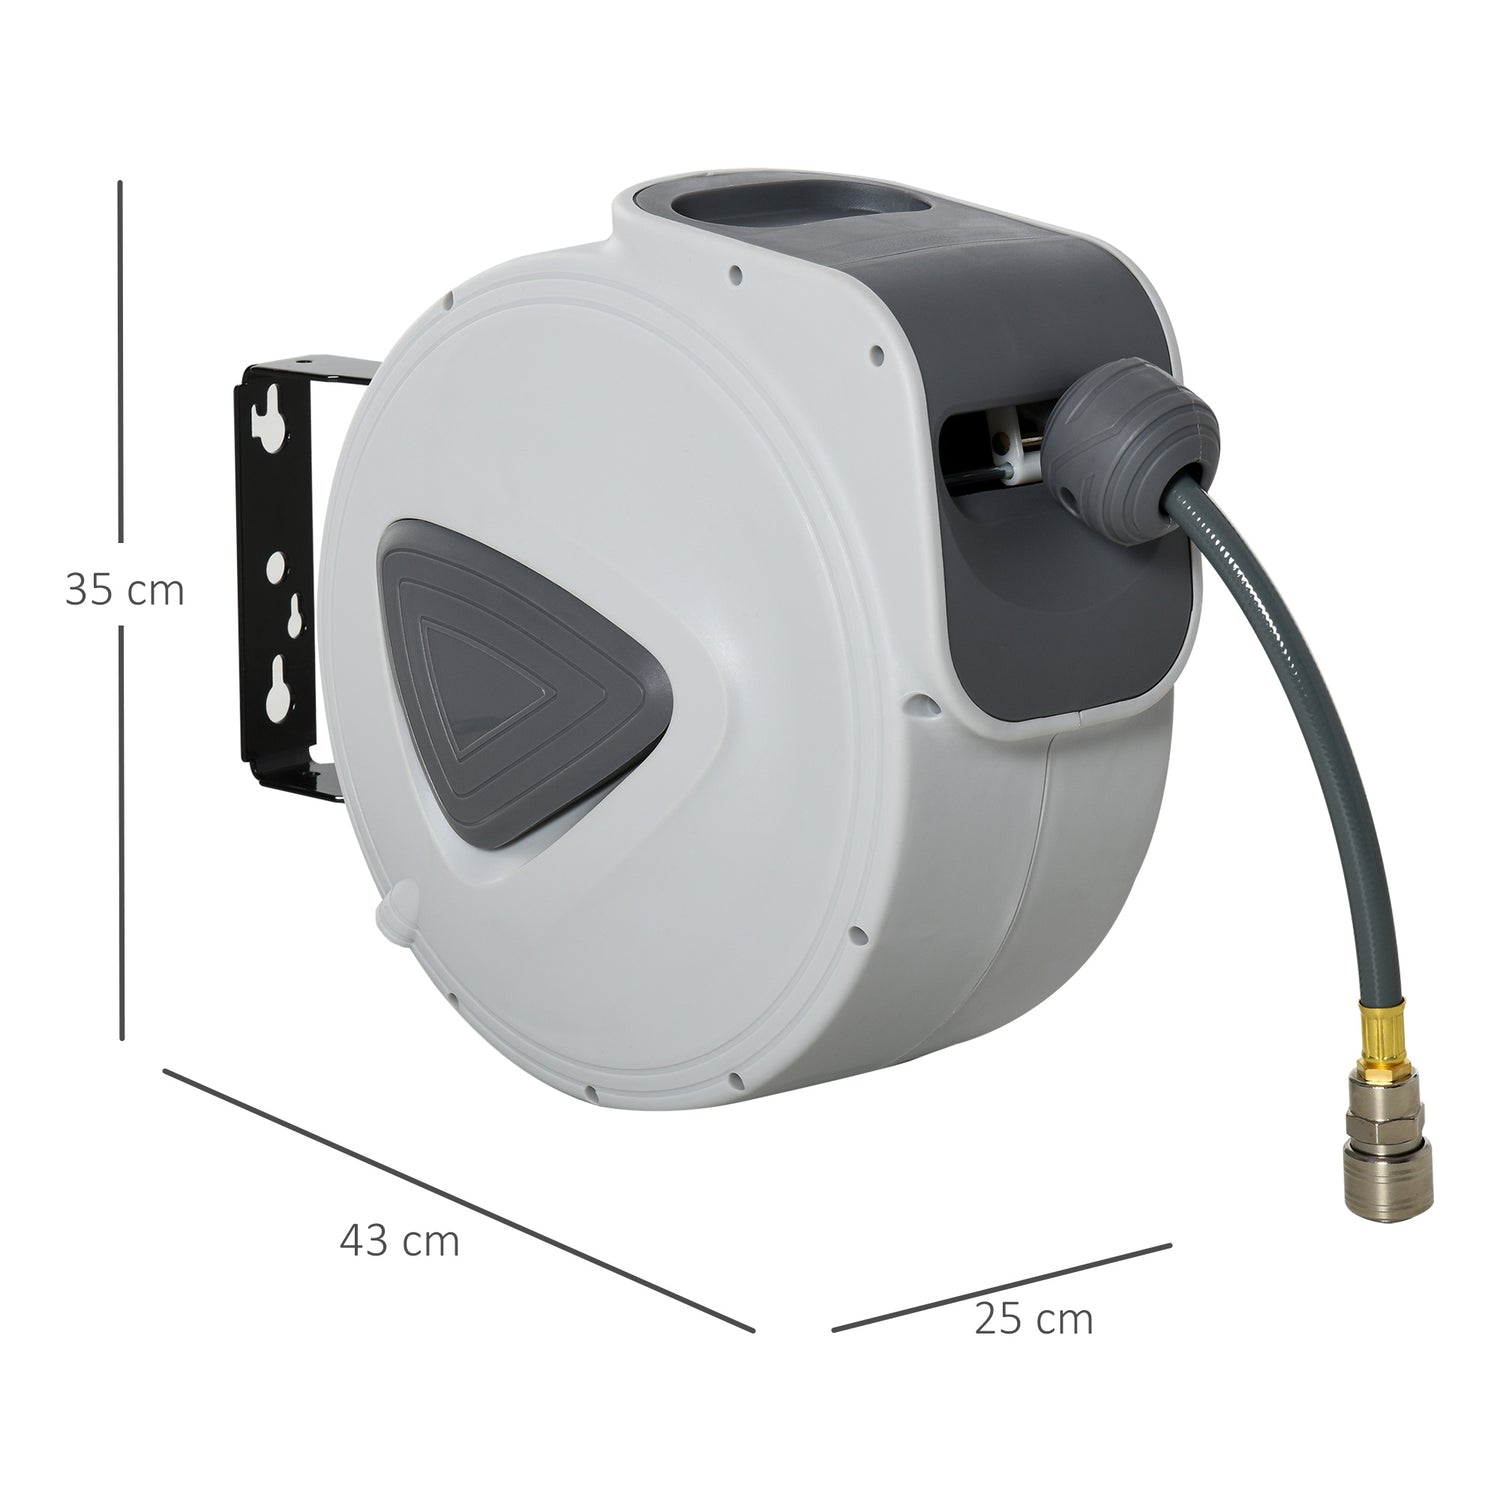 DURHAND Retractable Air Hose Reel Wall Mounted Workshop Compressor Too –